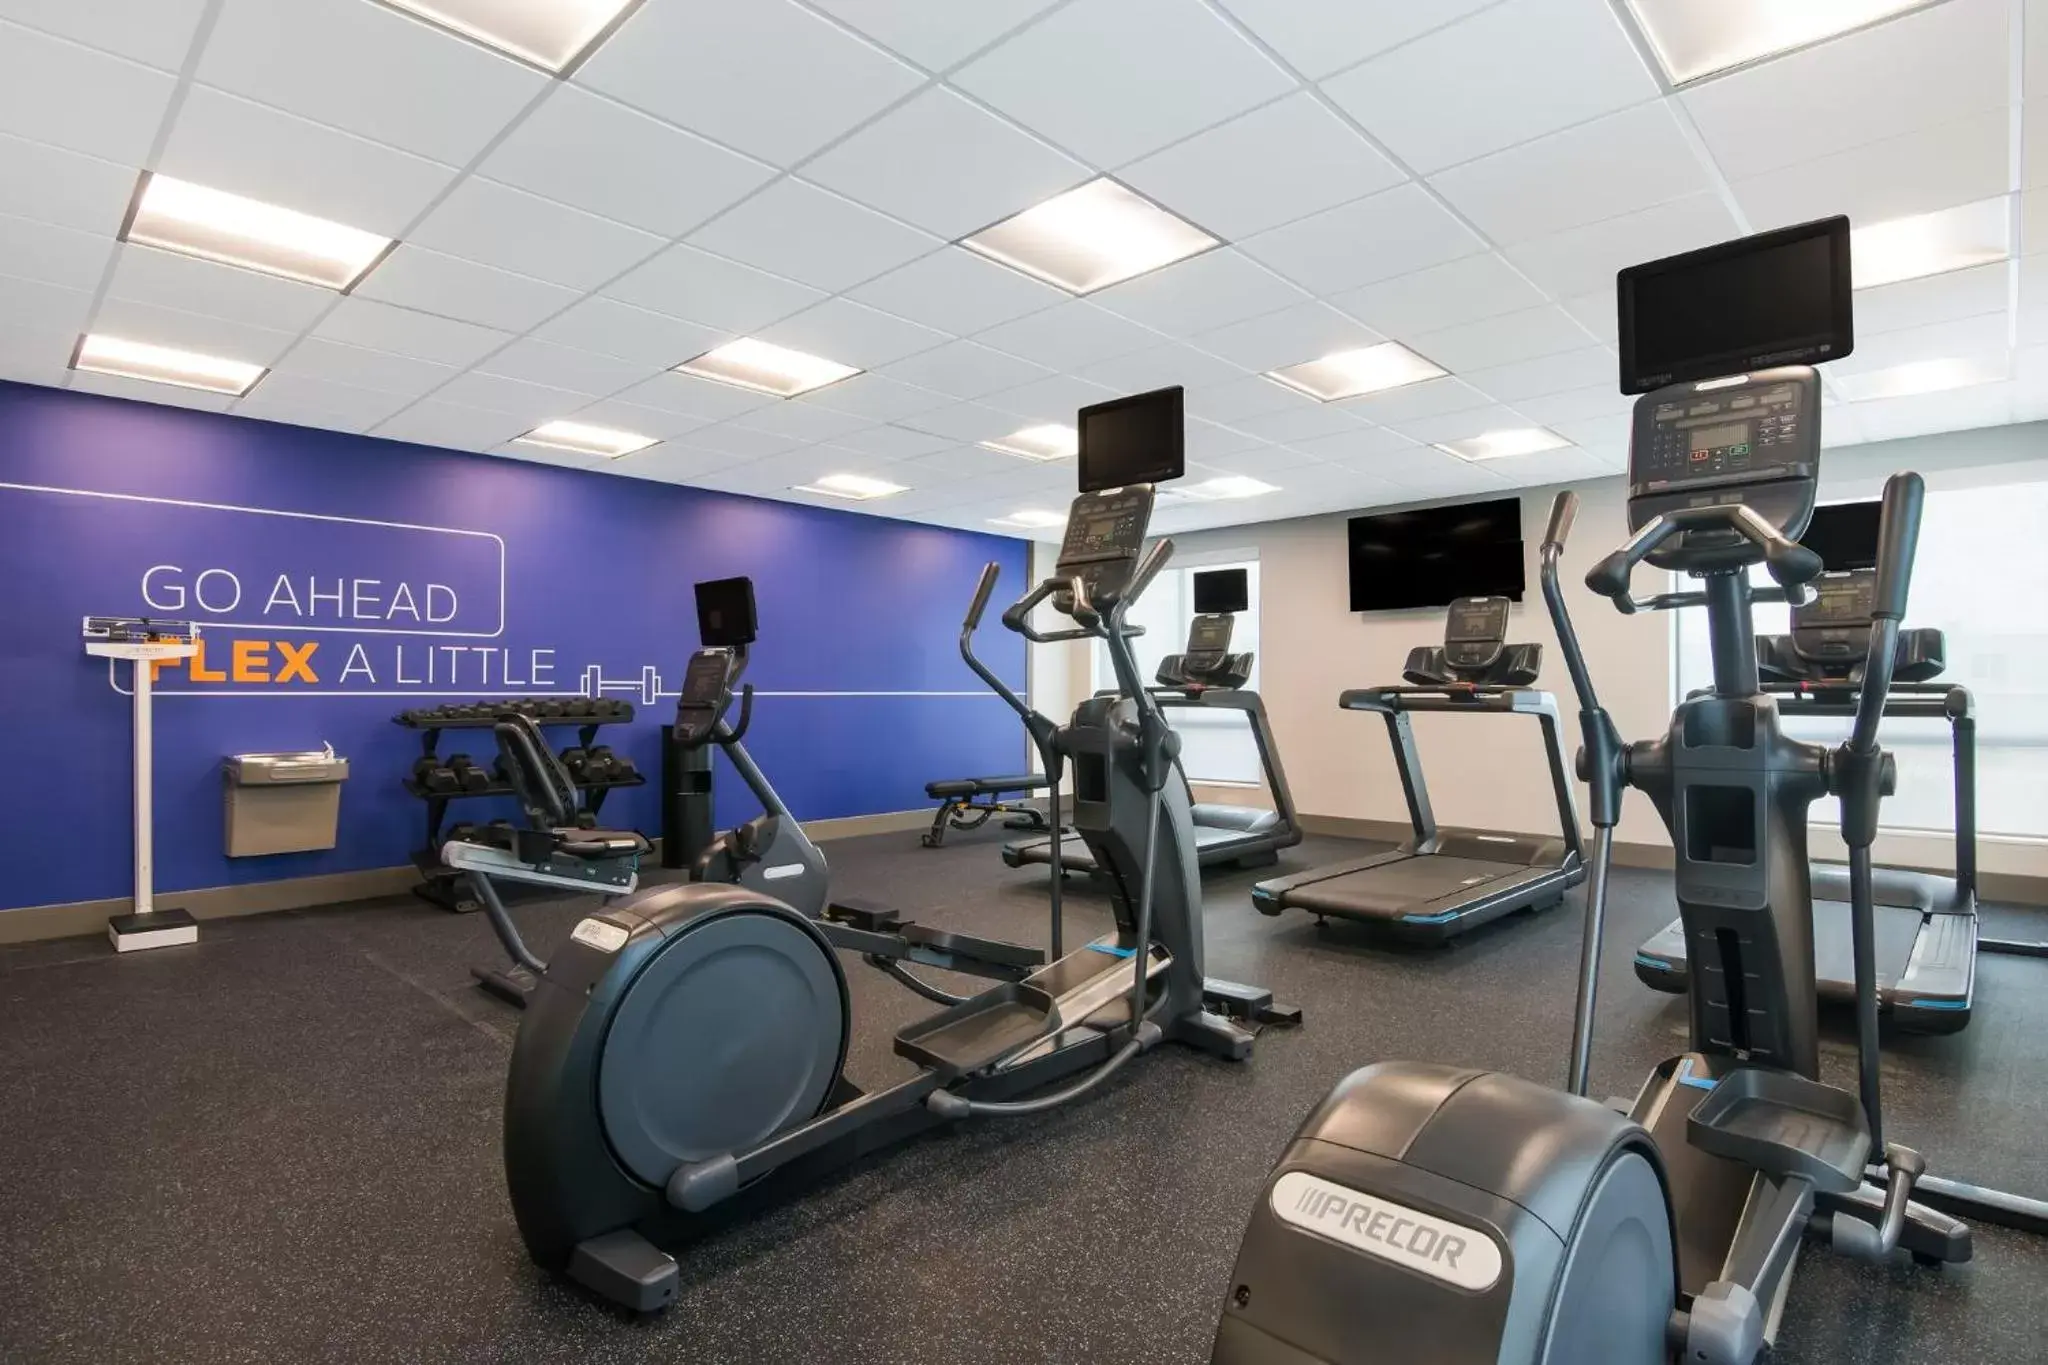 Fitness centre/facilities, Fitness Center/Facilities in Holiday Inn Express & Suites - Springdale - Fayetteville Area